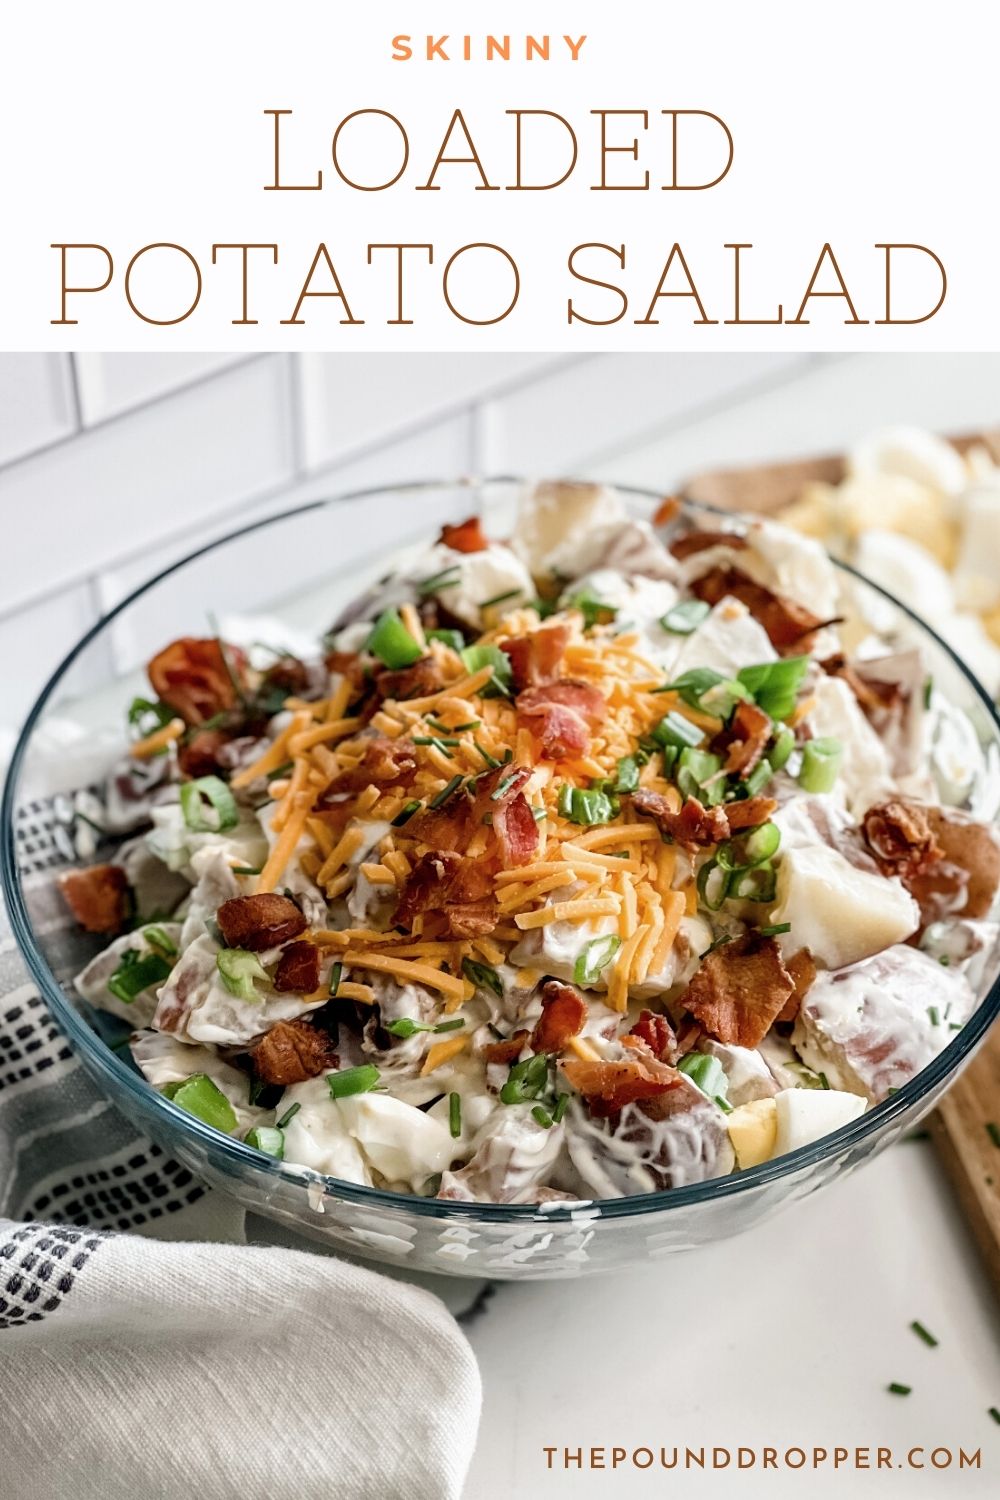 This Skinny Loaded Potato Salad is a healthier version of a loaded potato salad-packed with protein-made with non fat Greek yogurt, light mayo, bacon pieces, green onions, potatoes, and hard boiled eggs!  It's an easy potato salad recipe that has become a staple at our summer picnics, BBQ's, and holiday dinner. This is a MUST have side dish! via @pounddropper